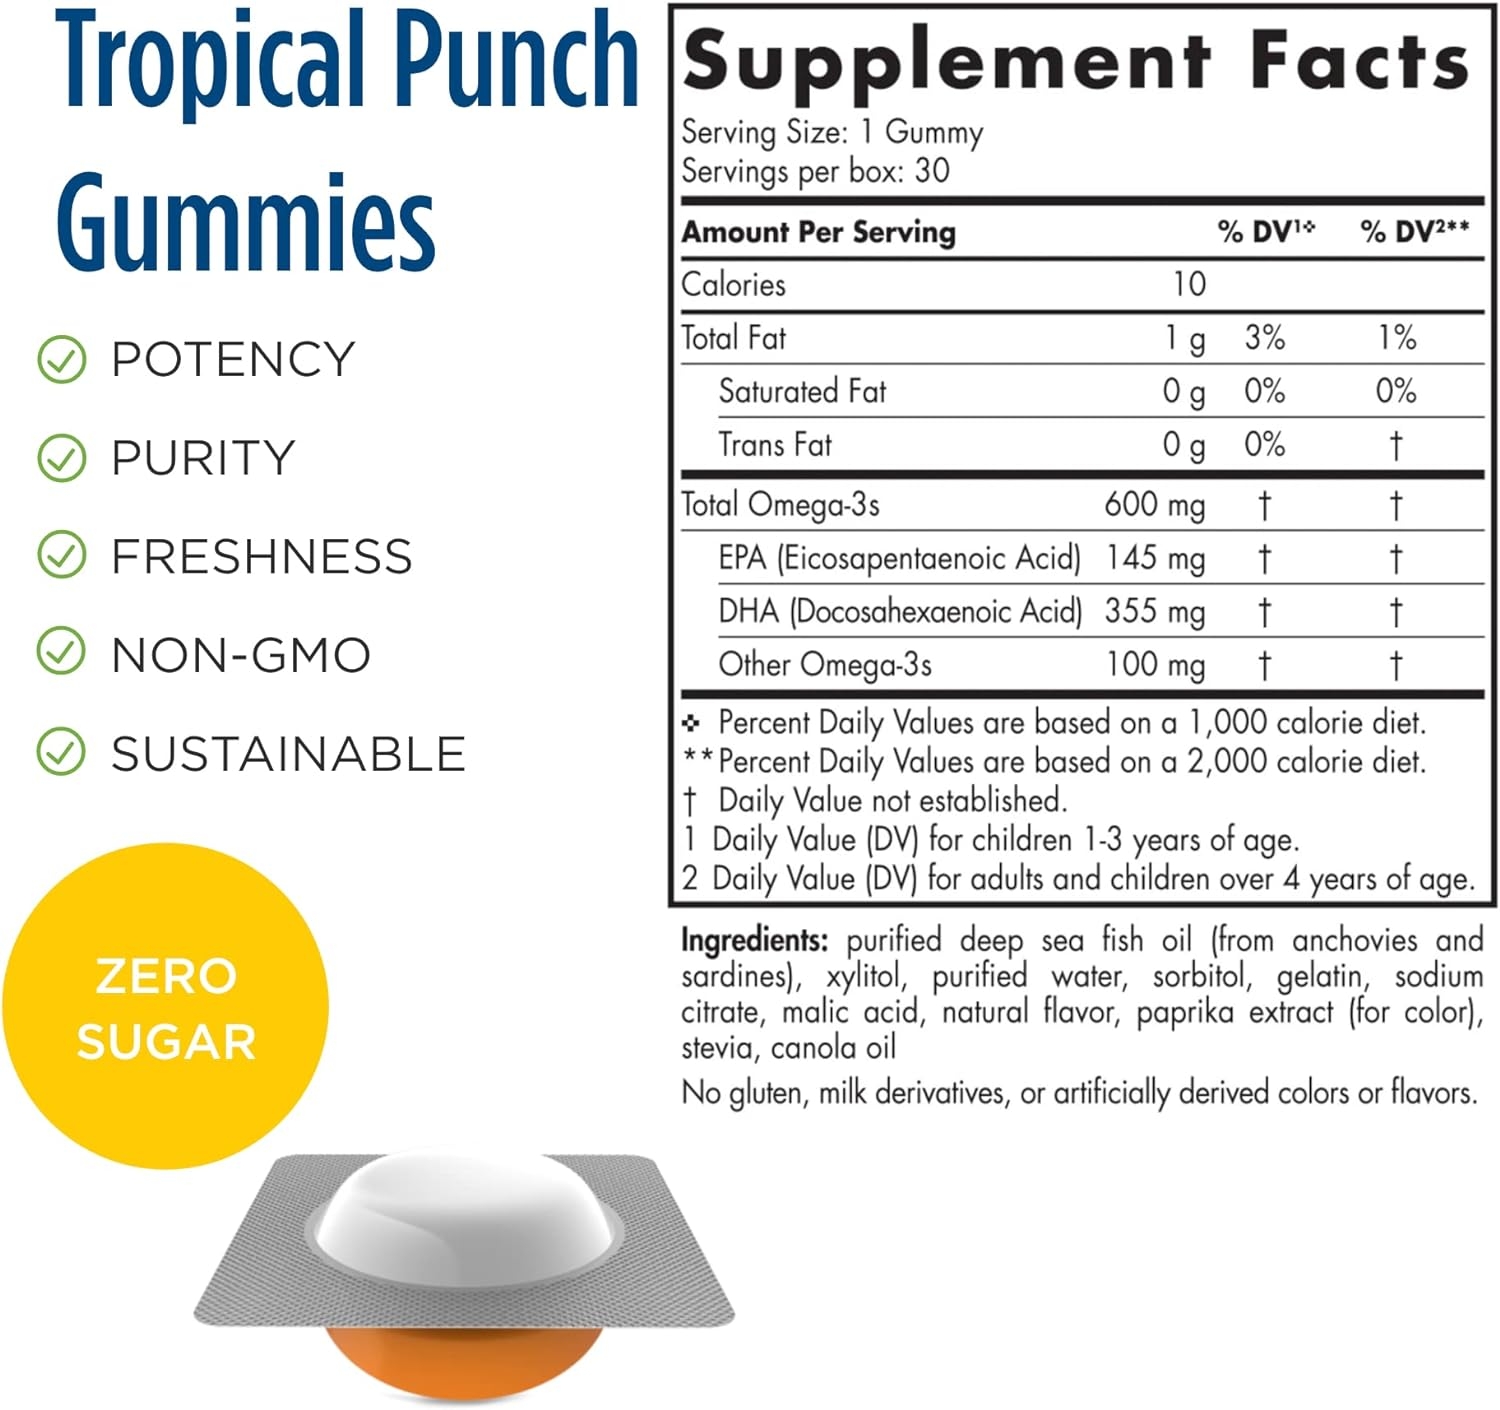 Nordic Naturals Children’s DHA Gummies, Tropical Punch - 30 Gummies - 600 mg Total Omega-3s with EPA & DHA - Brain Development, Learning, Healthy Immunity - Non-GMO - 30 Servings